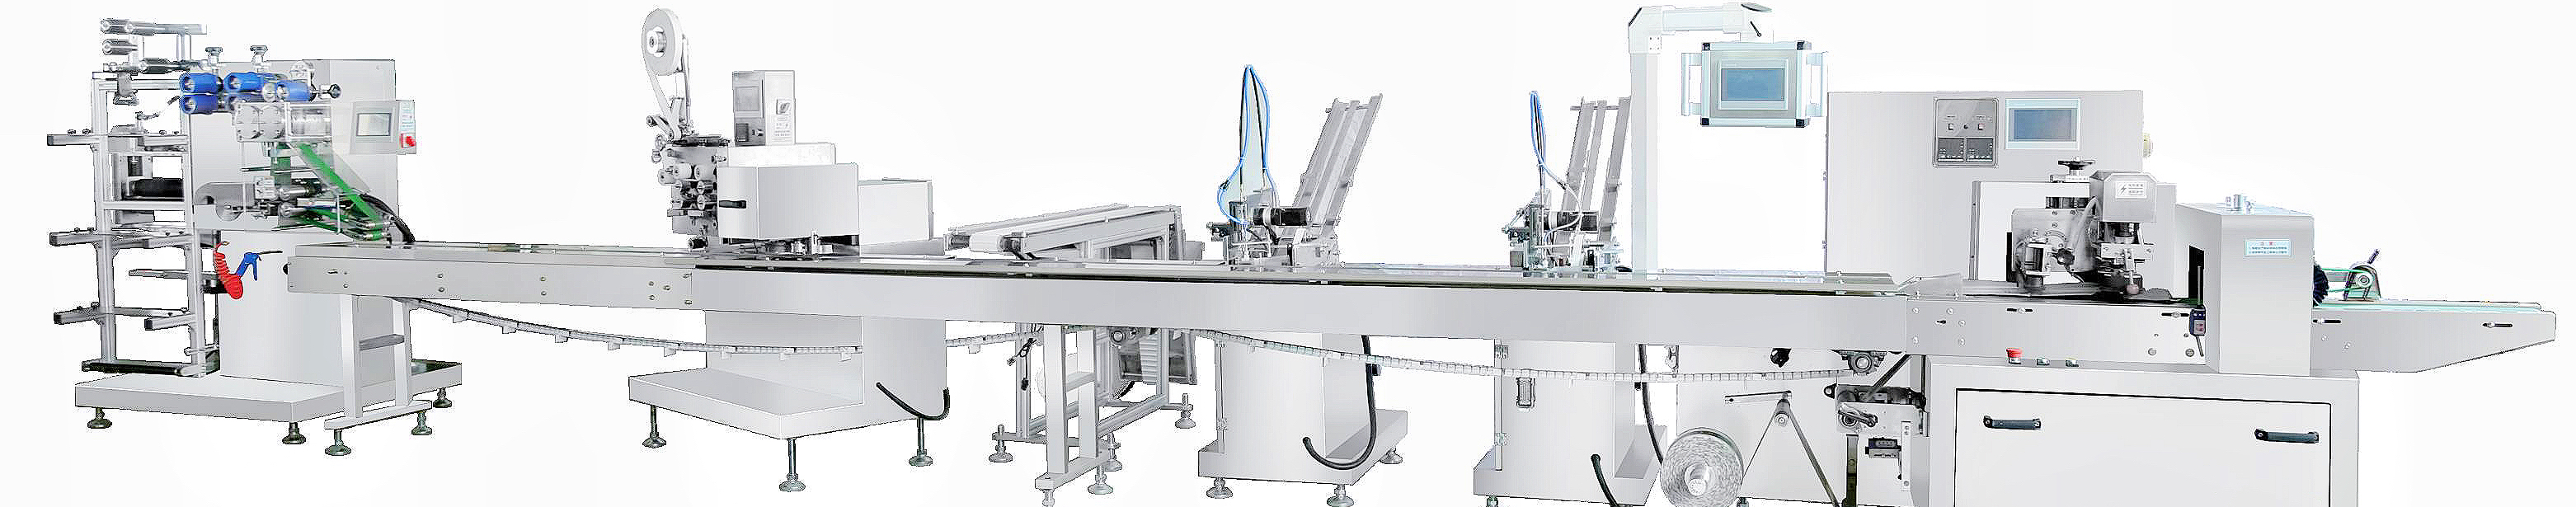 Non Food Packaging Machine